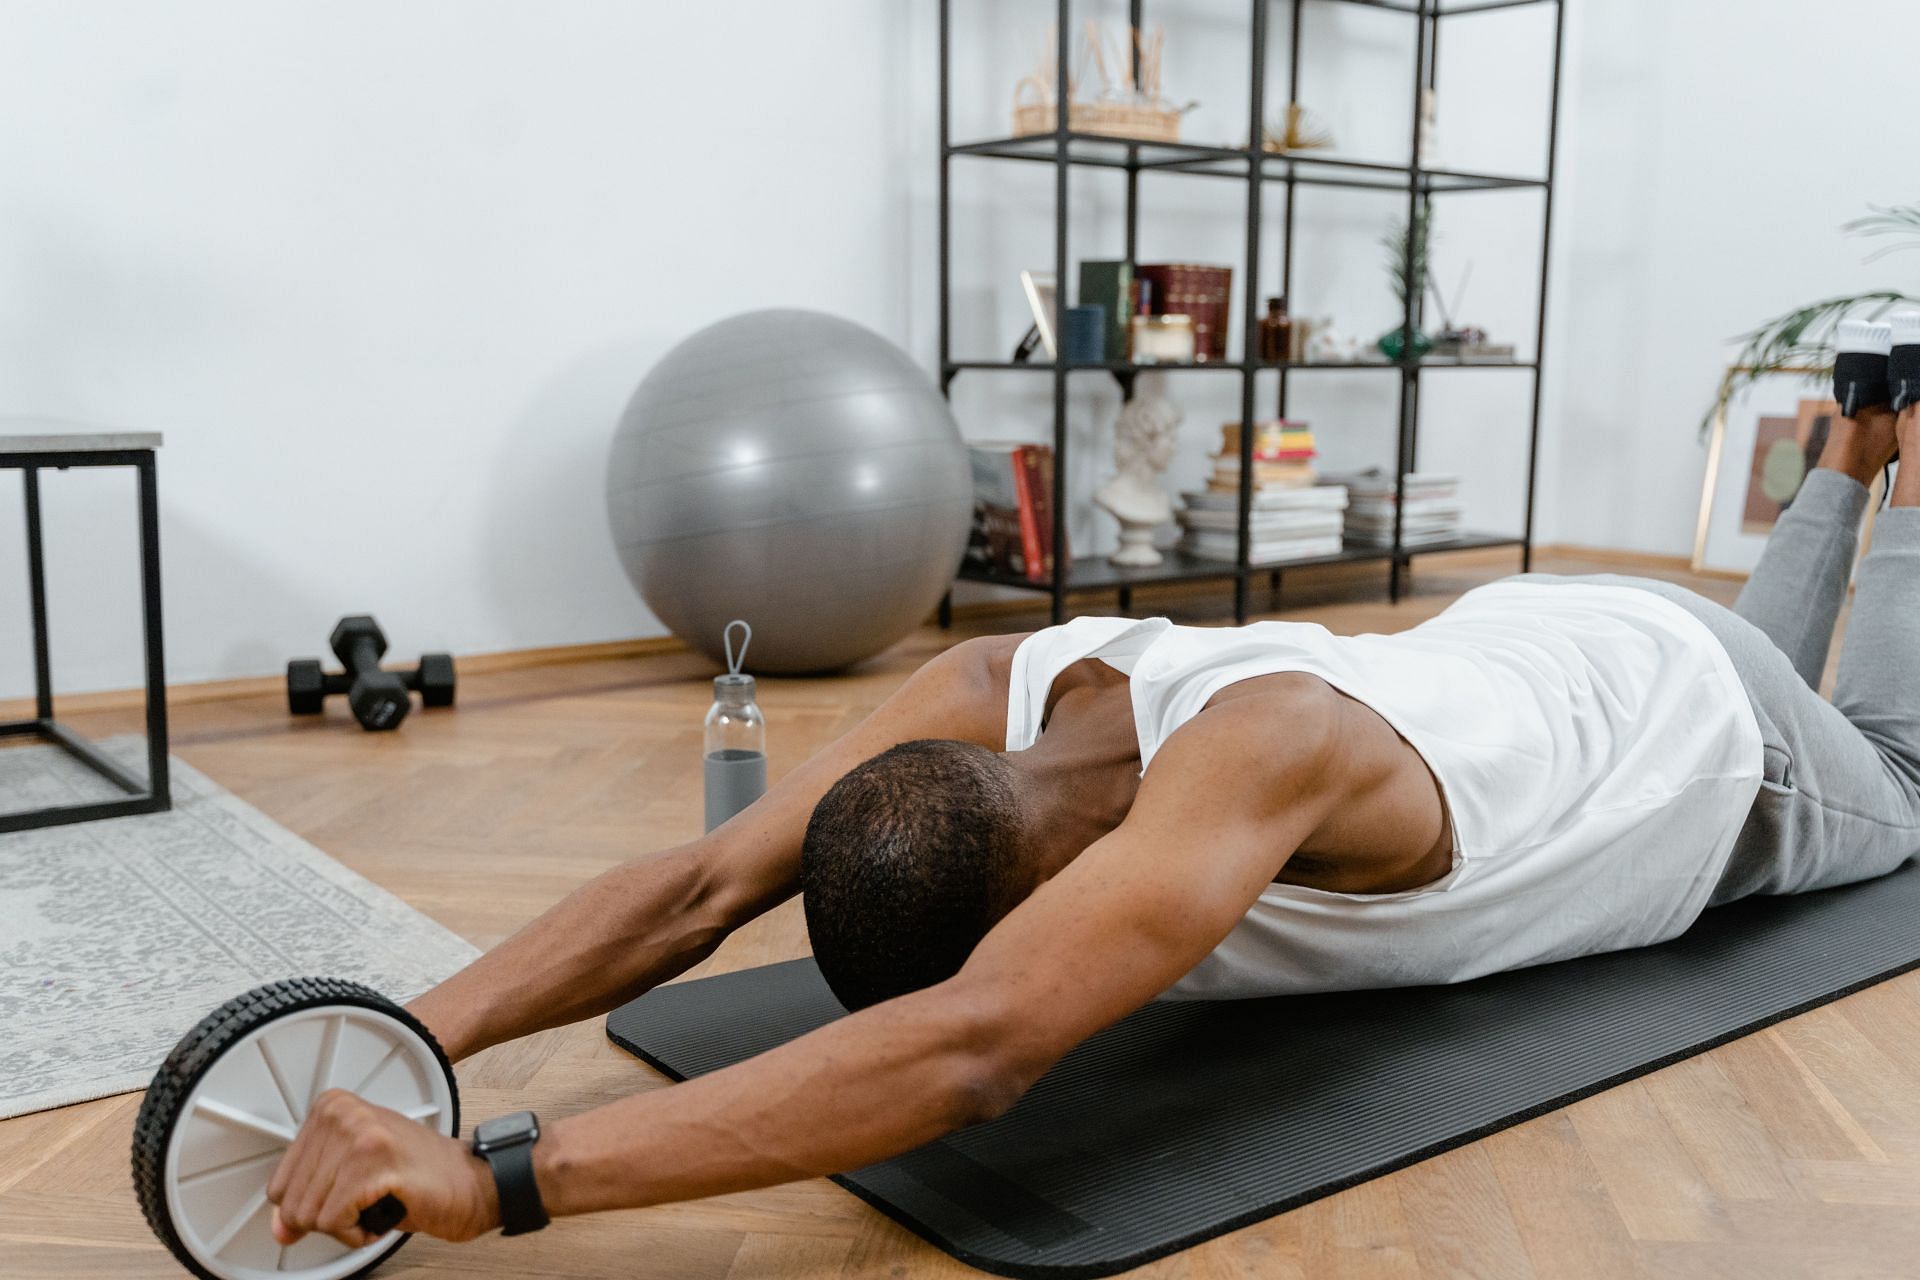 Keep your back straight while performing ab roller exercises. (Image via Pexels/Mart Production)